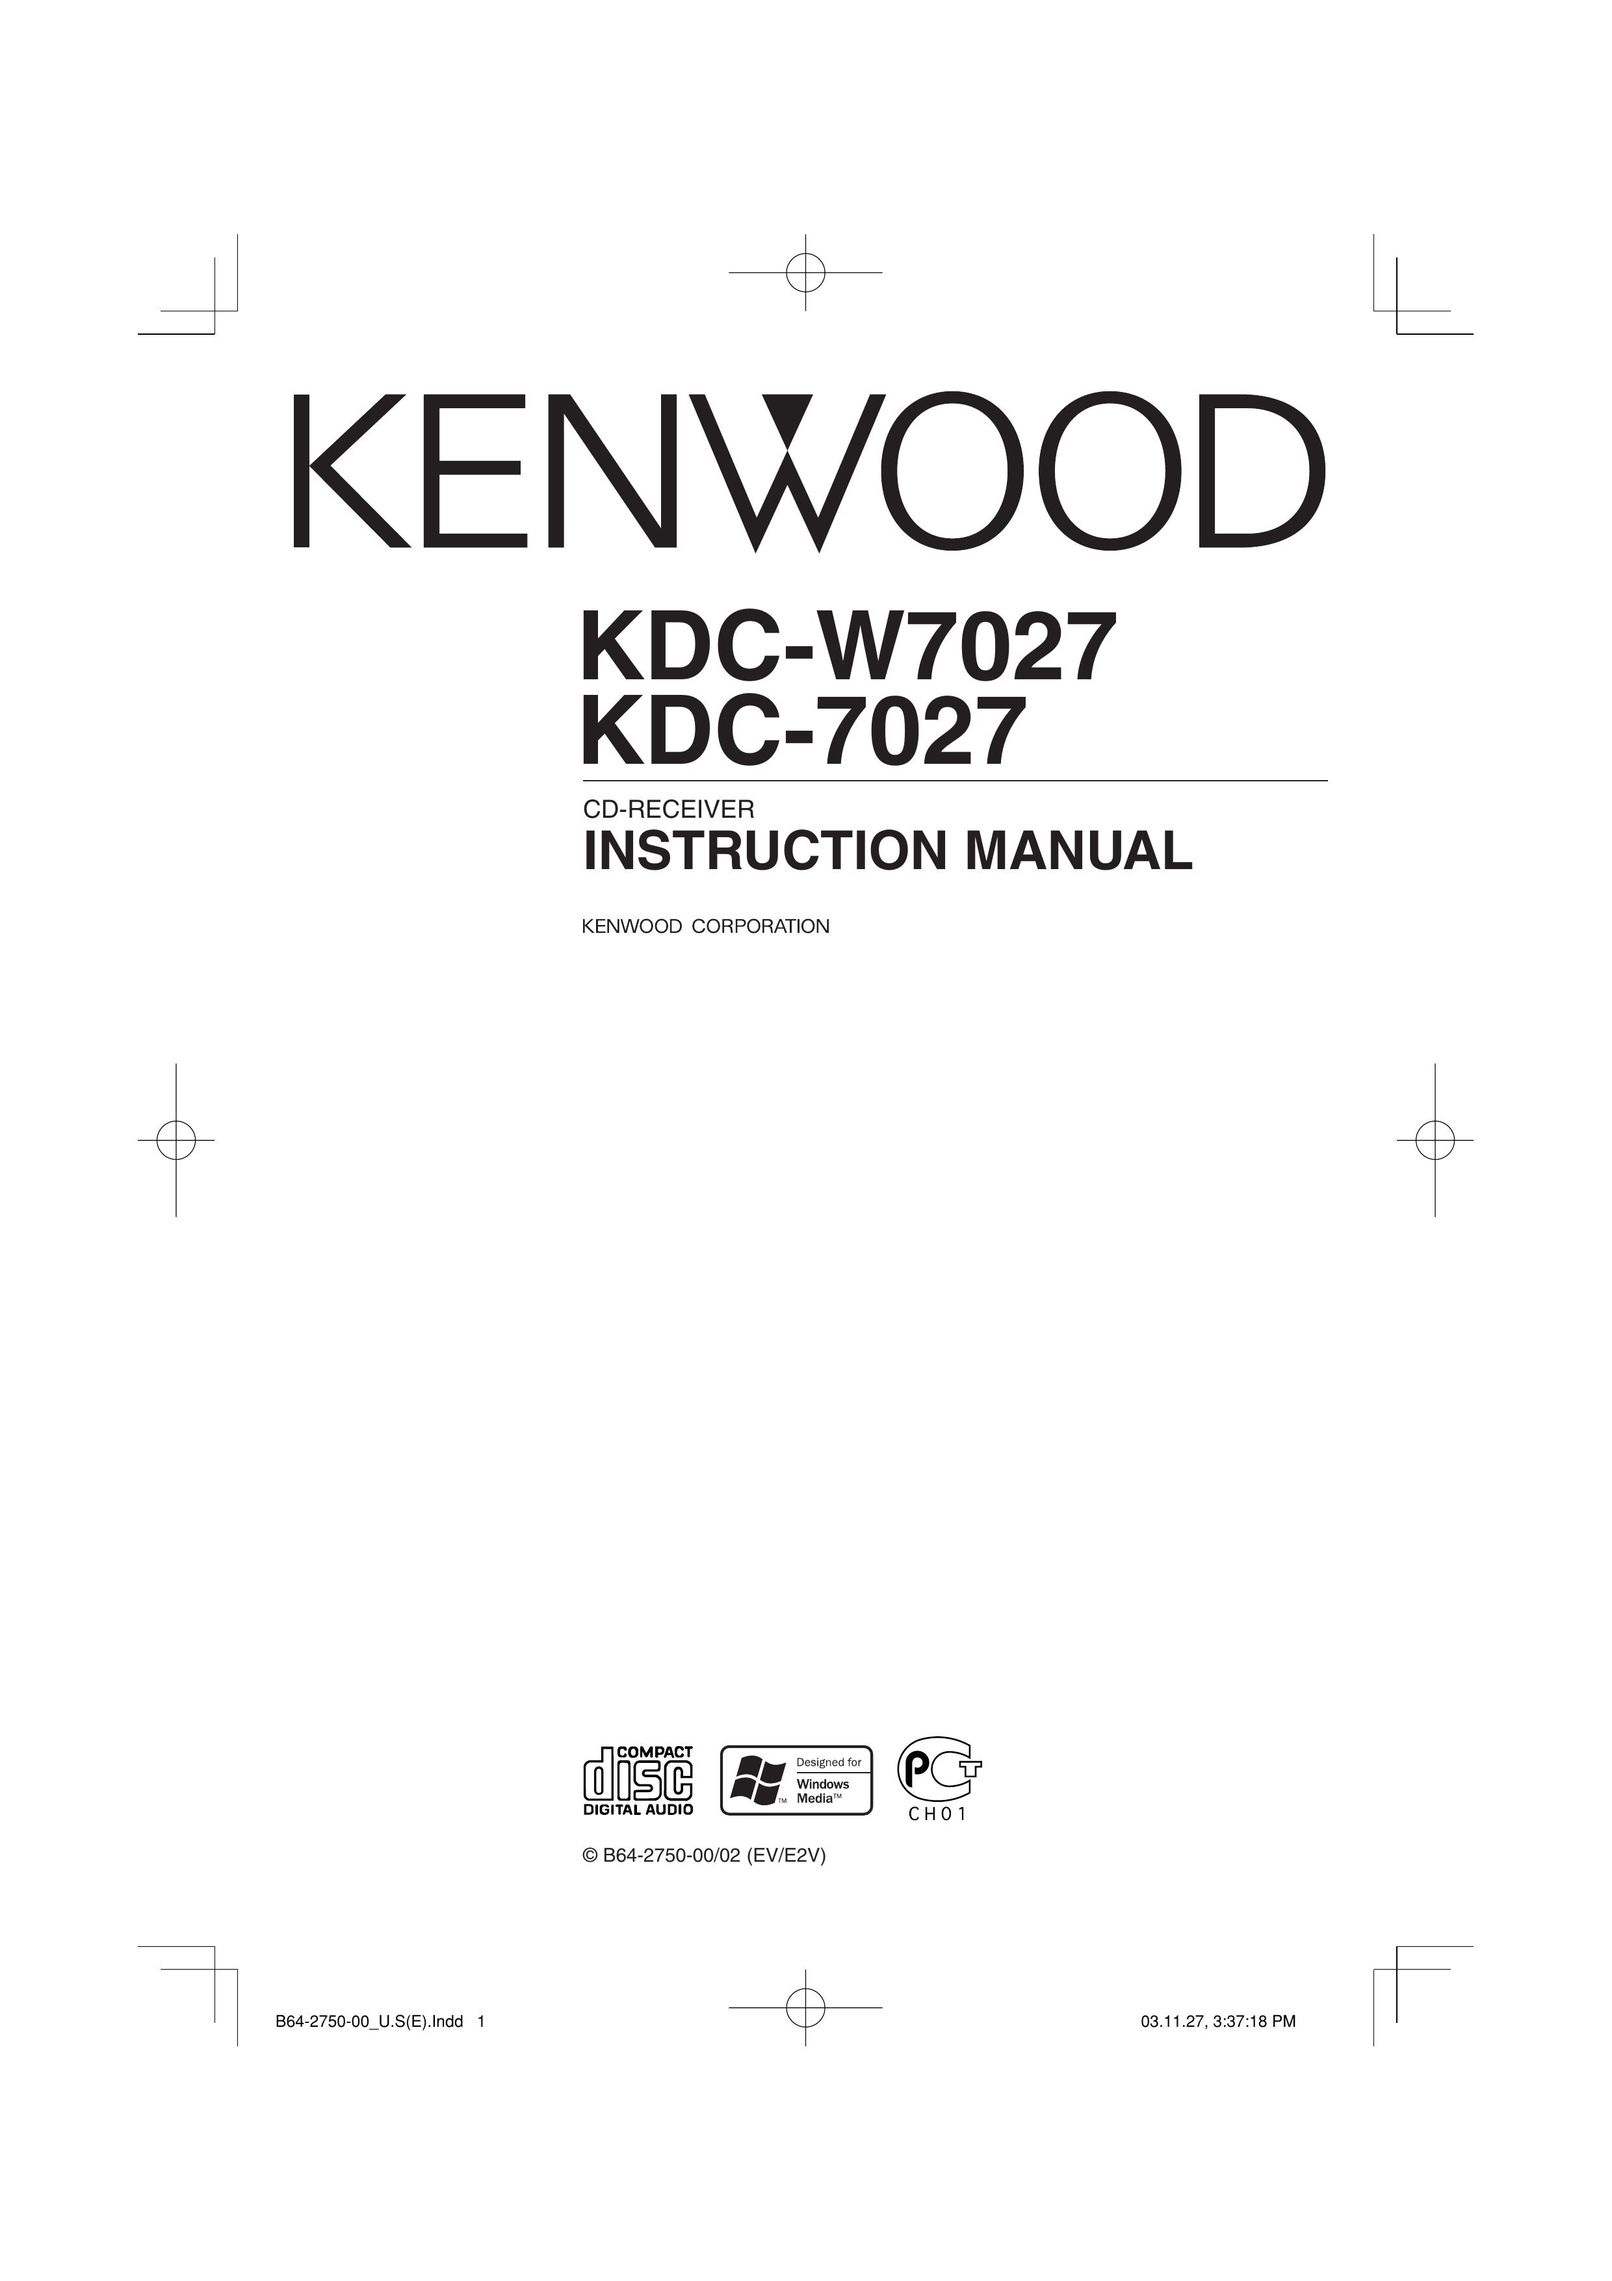 Disc Makers KDC-W7027 Car Stereo System User Manual